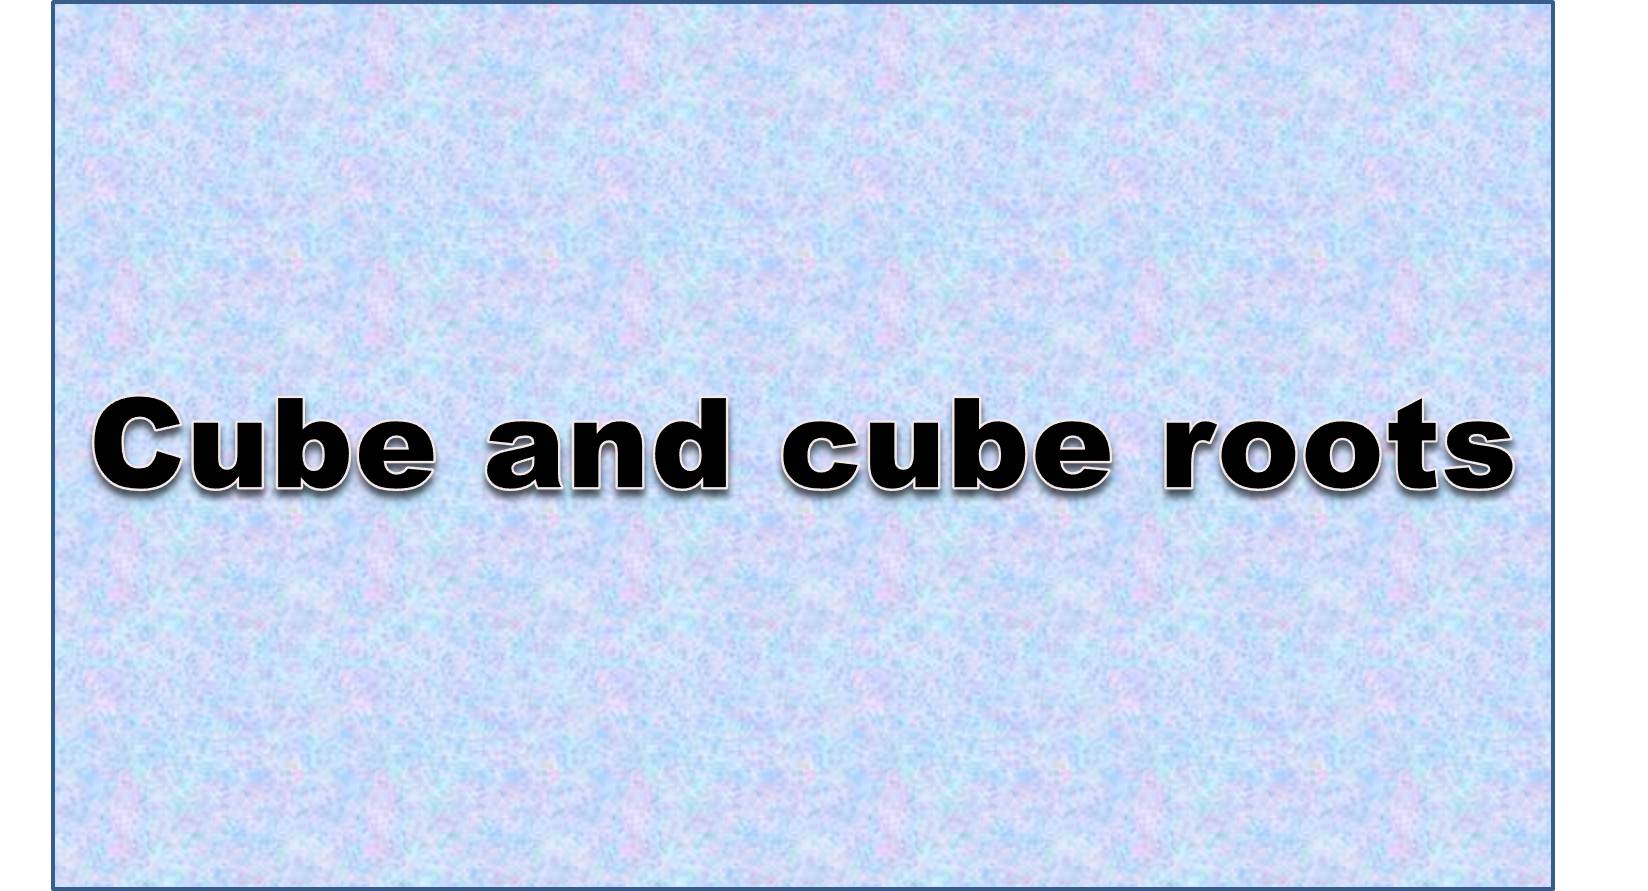 http://study.aisectonline.com/images/Simplifying a cube root.jpg